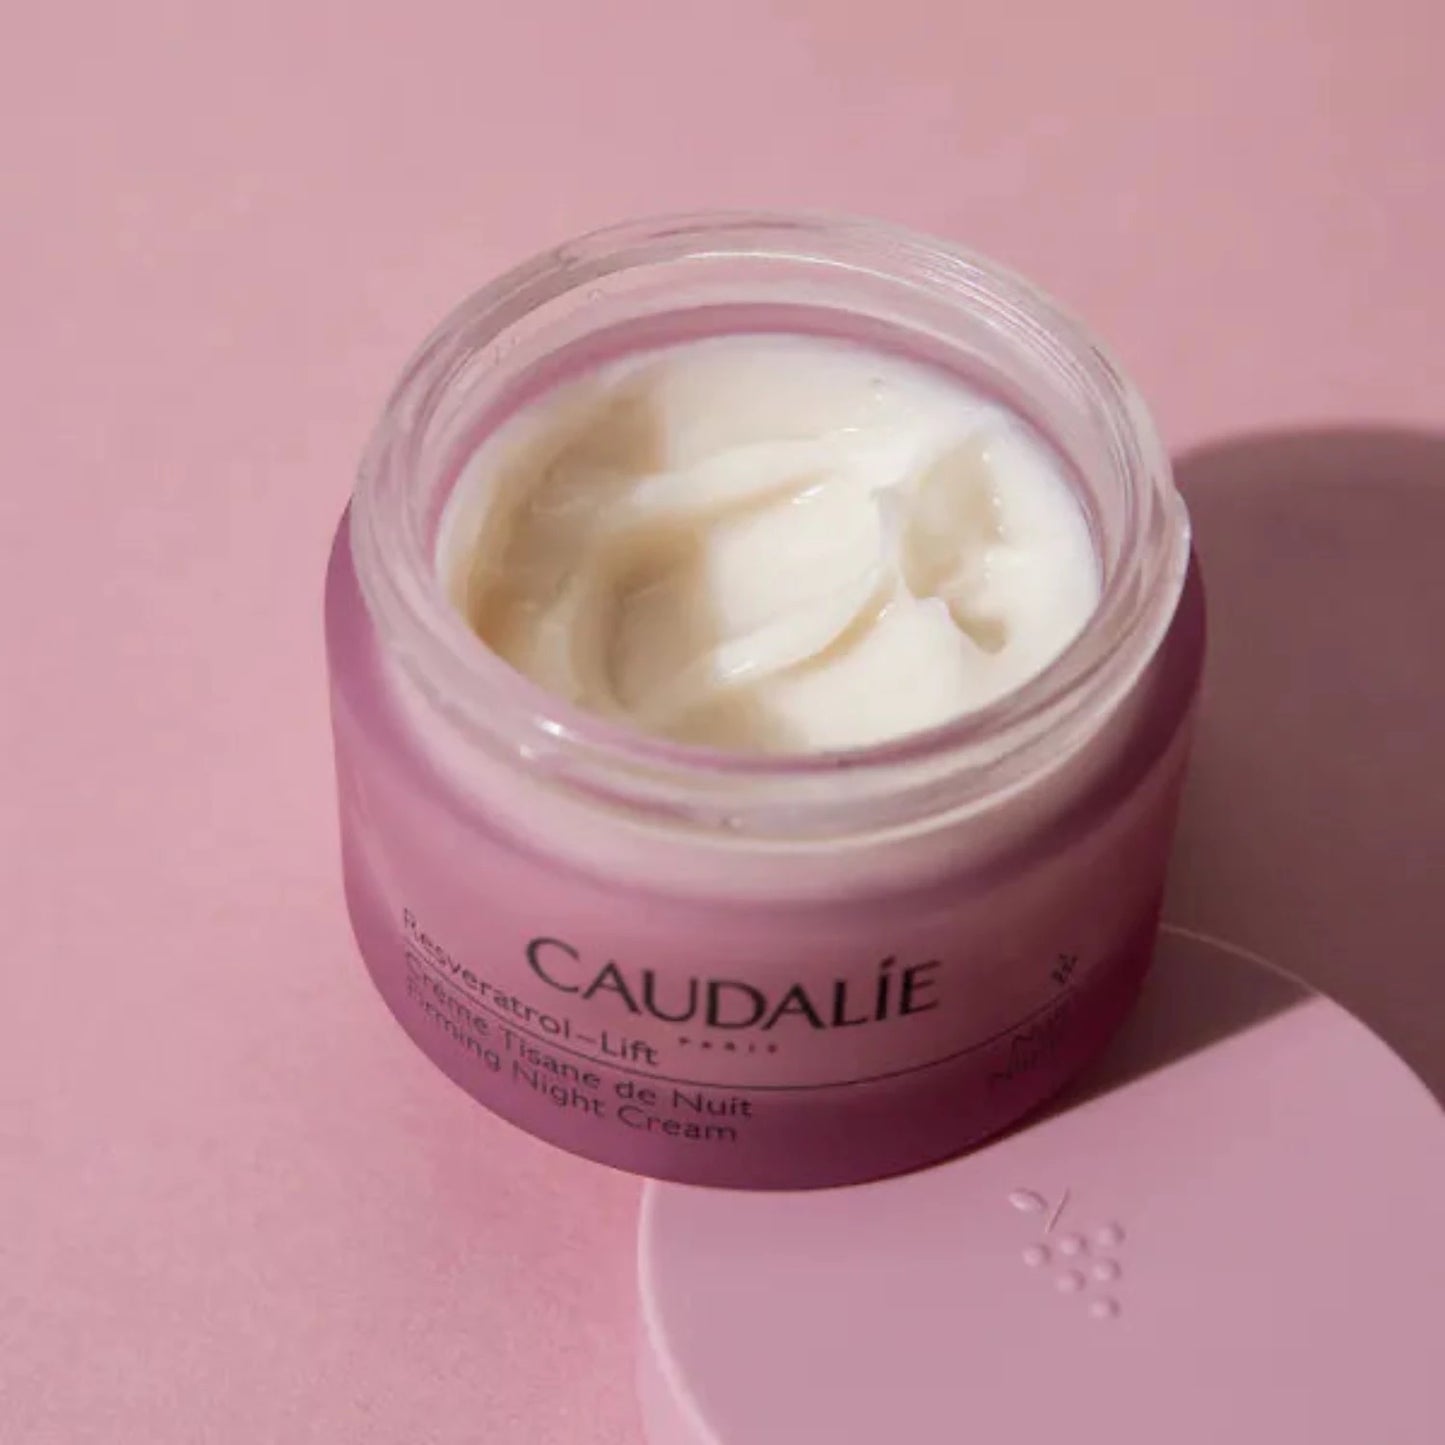 Caudalie Resveratrol Lift Firming Night Cream. Upon waking, skin appears rested and firmer, with a more radiant complexion.